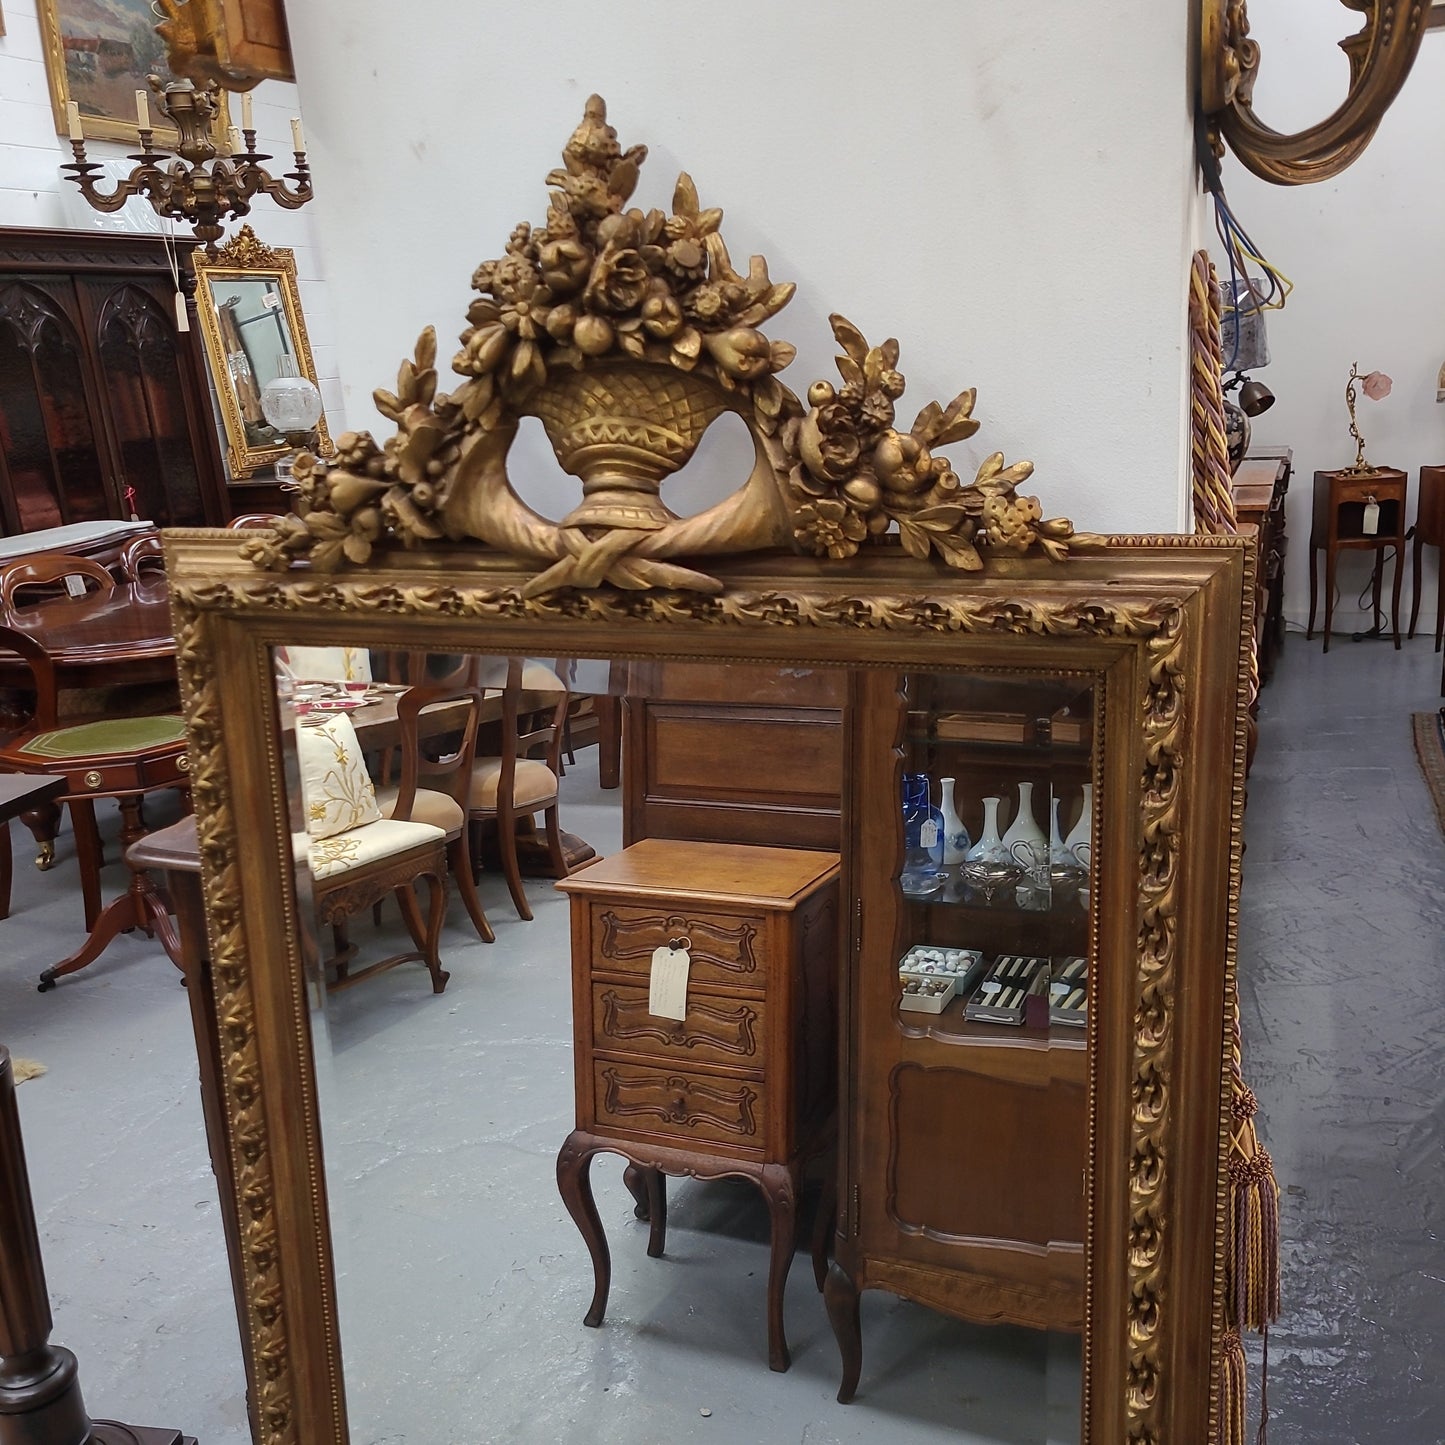 19th Century French Gilt Framed Mantle Mirror